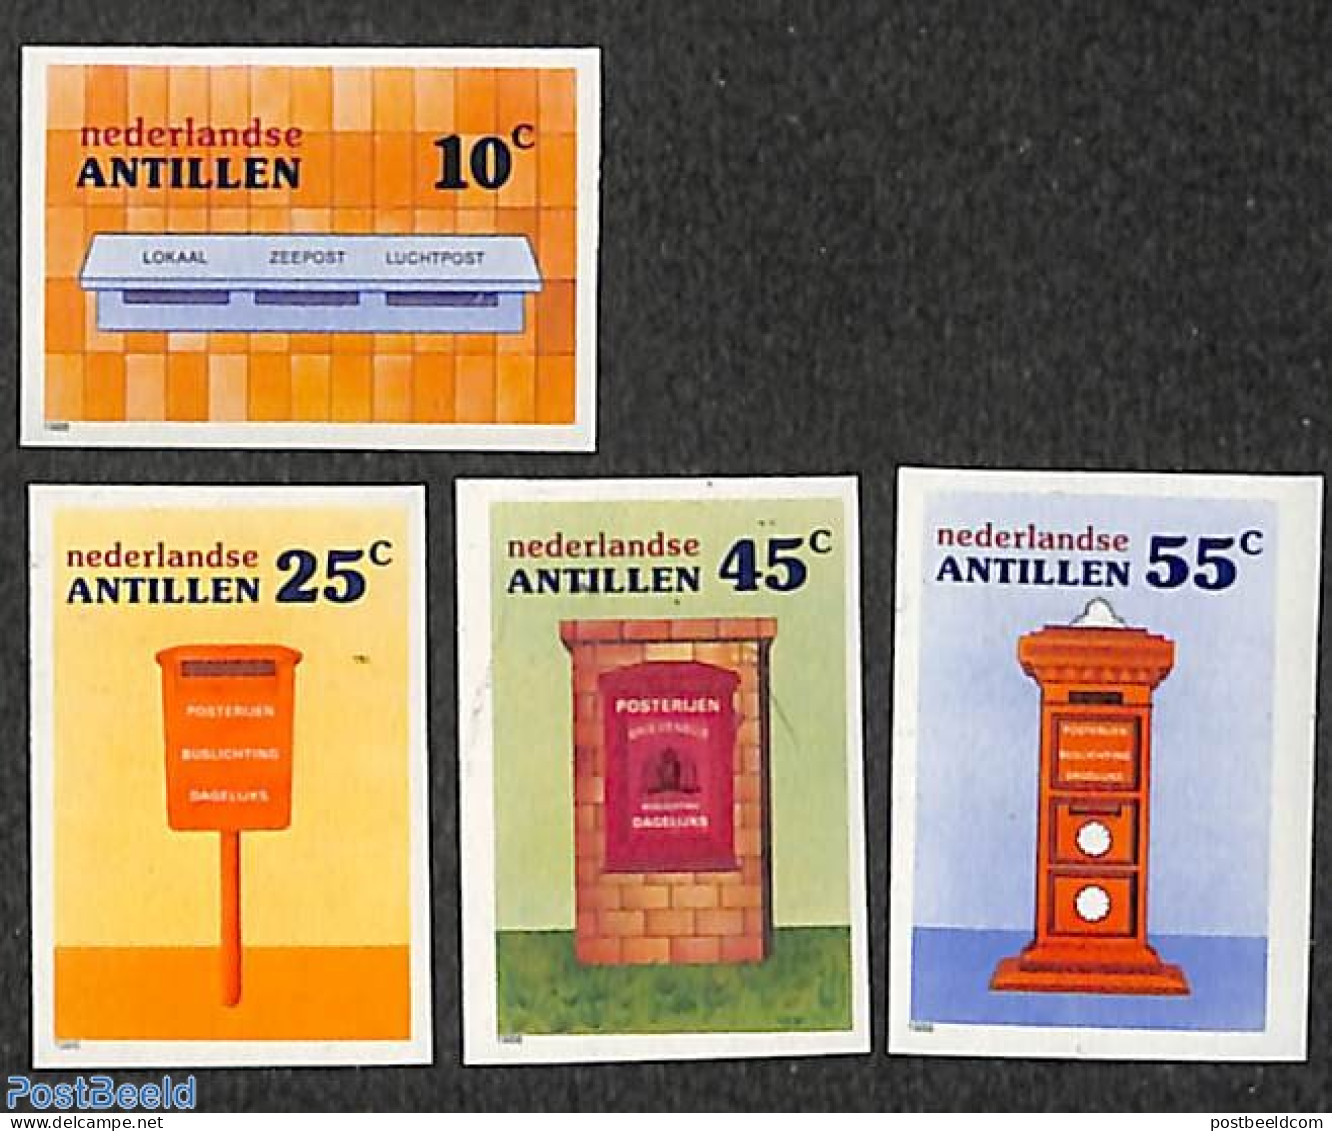 Netherlands Antilles 1986 Mail Boxes 4v, Imperforated, Mint NH, Mail Boxes - Post - Poste